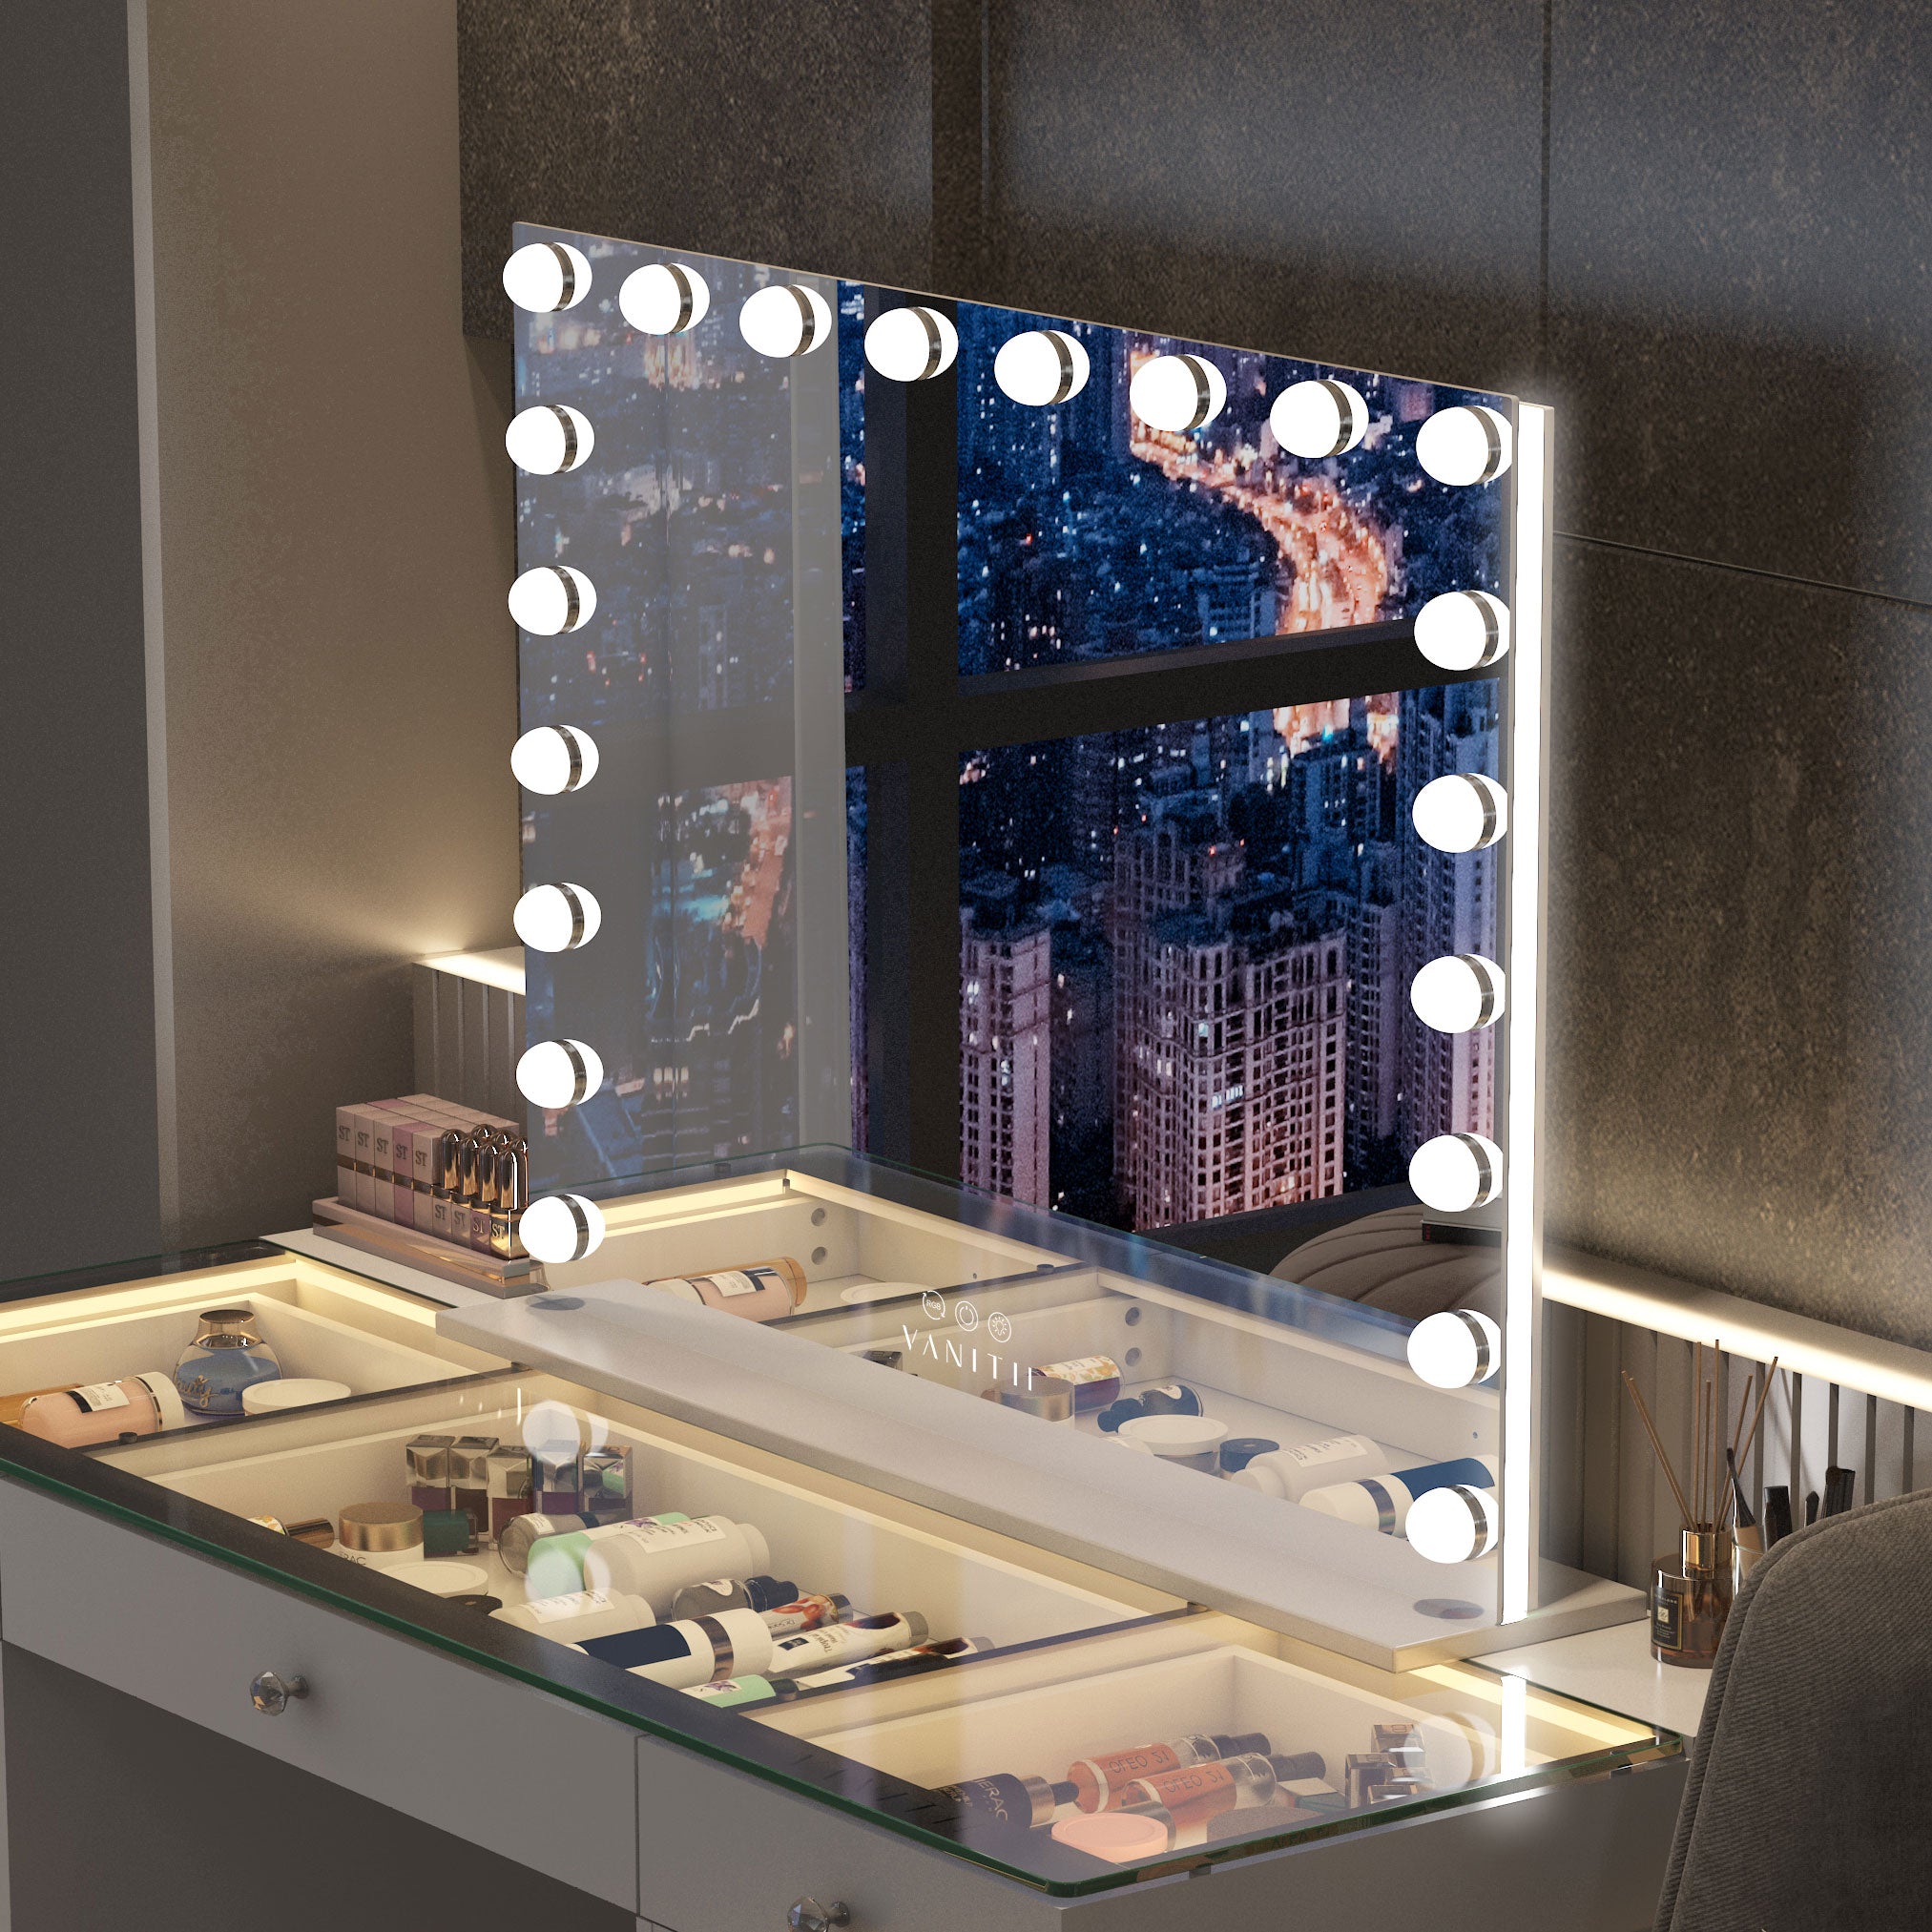 VANITII Mary Hollywood Glow Vanity Mirror with RGB - 20 Dimmable LED Bulbs